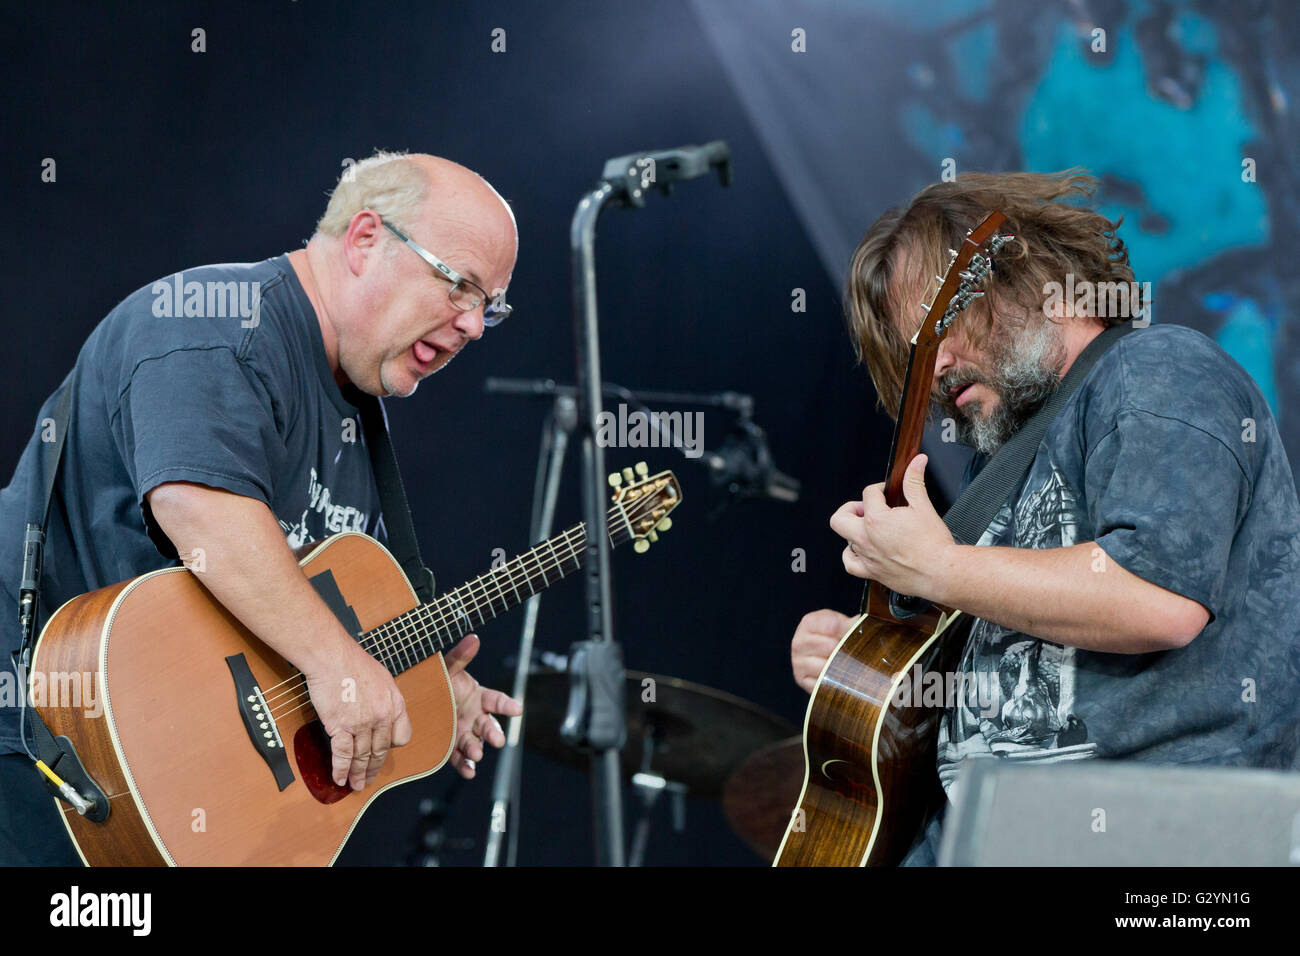 Nuremberg, Germany. 04th June, 2016. US singers and actors Kyle Gass (L)  and Jack Black of the band Tenacious D. perform on stage at the 'Rock im  Park' (Rock in the Park)